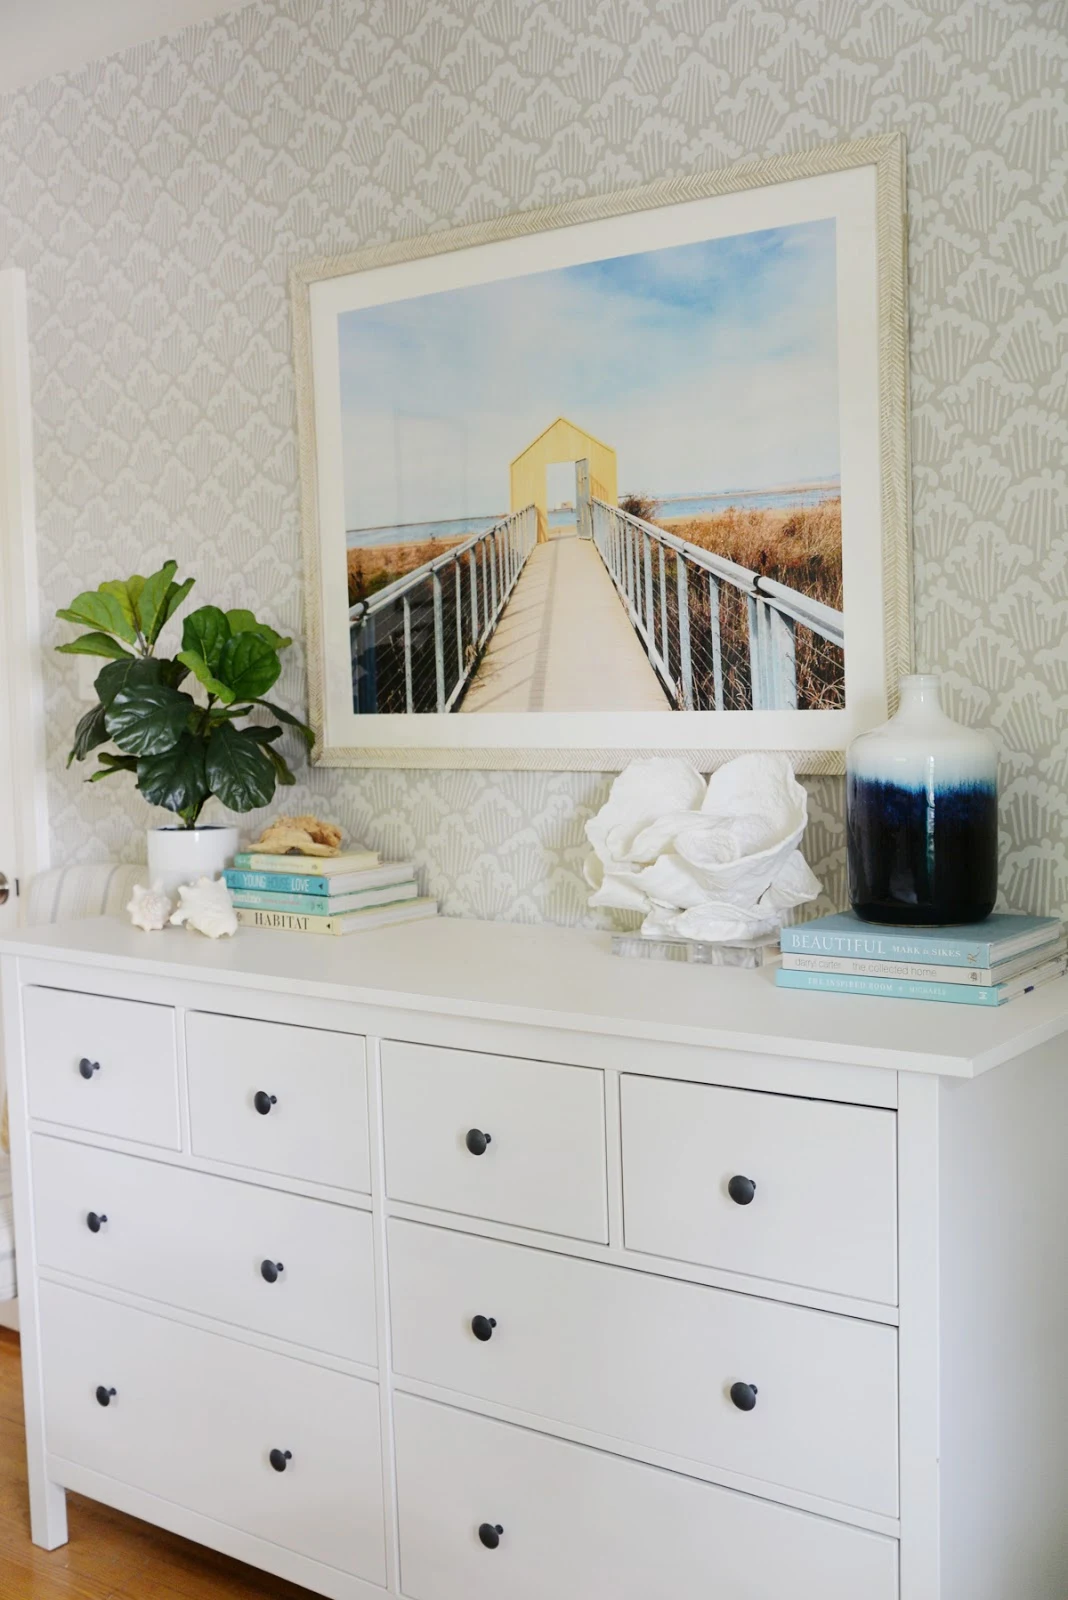 6 easy ways to bring summer into your home, summer decor, white blue bedding